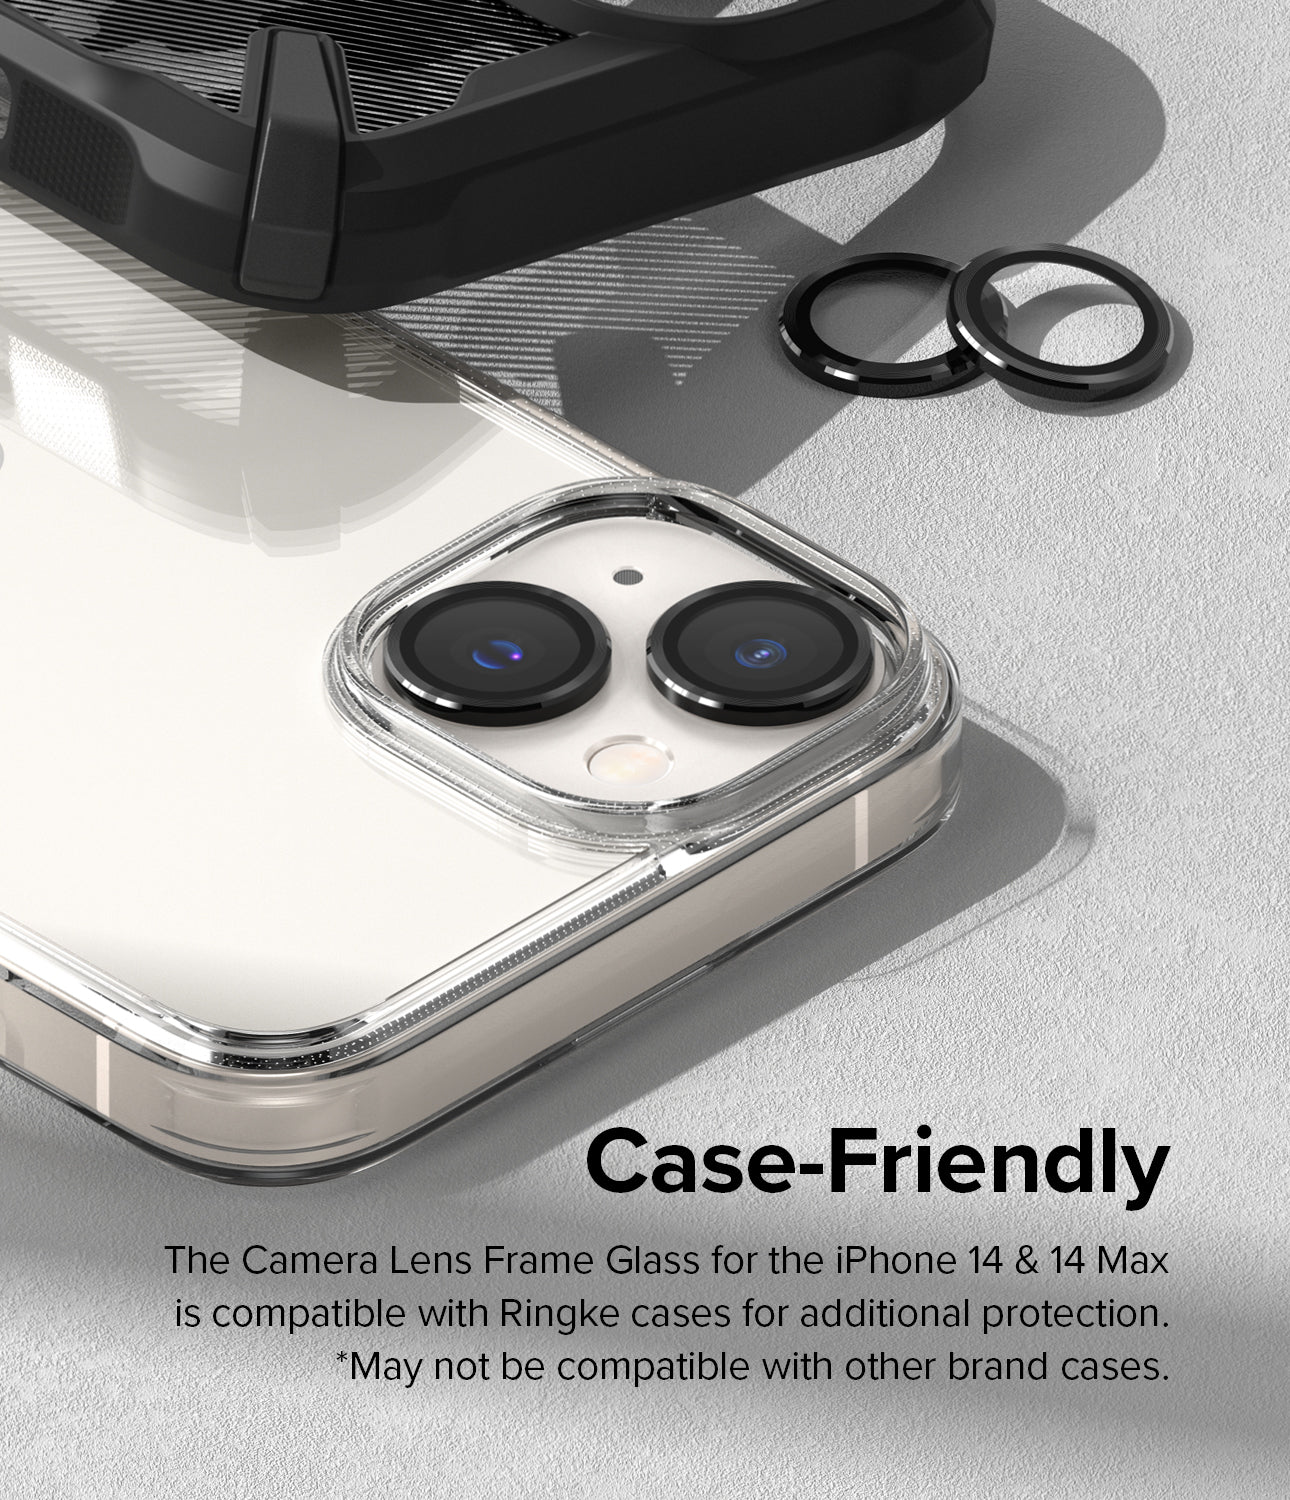 iPhone 14 Plus / 14 | Camera Lens Frame Glass - Case-Friendly. The camera lens frame glass for the iPhone 14 & 14 Plus iscoompatible with Ringke cases for additional protection. *May not be compatible with other brand cases.